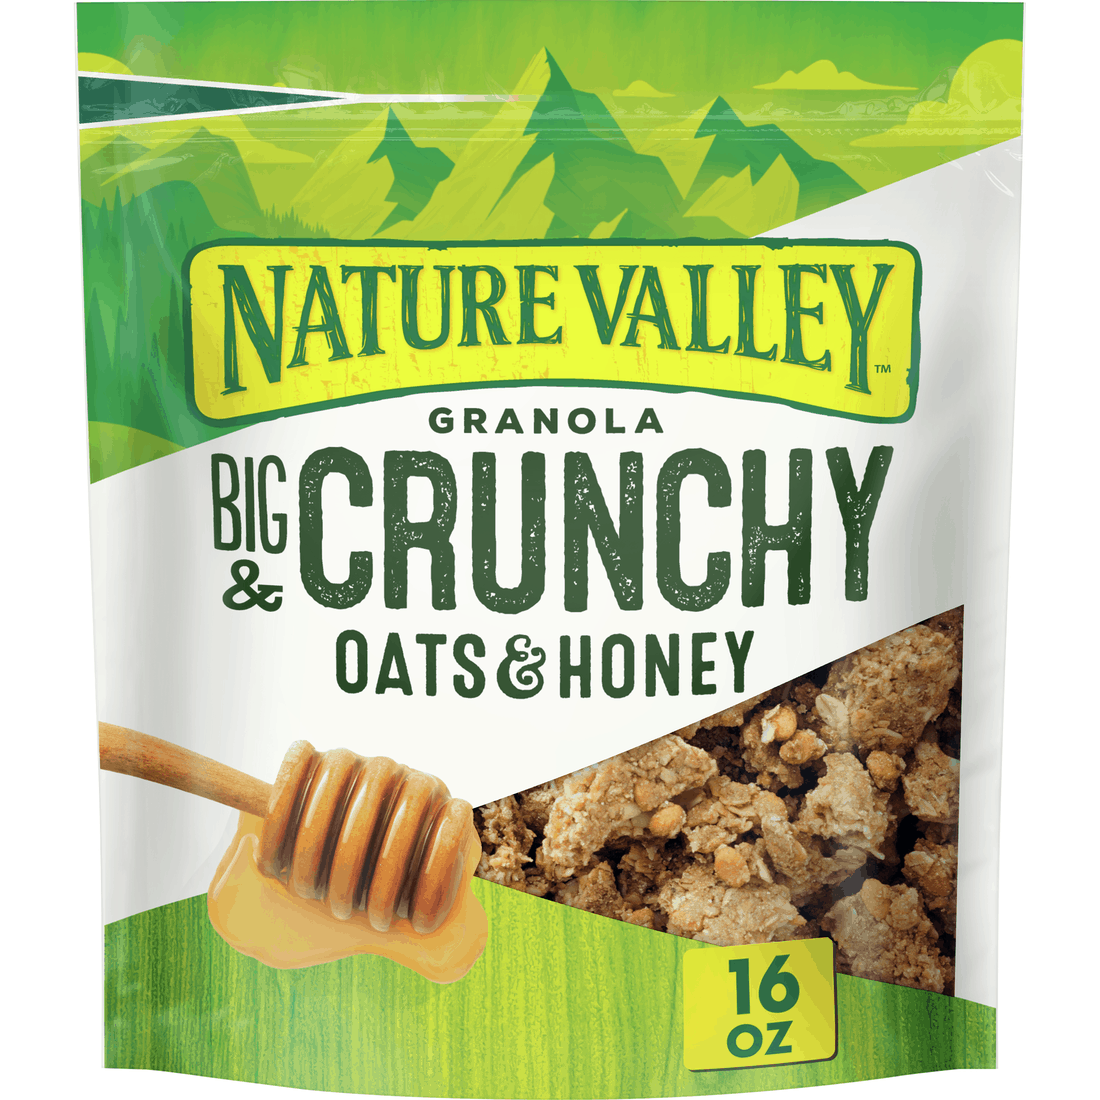 Nature Valley Granola, Crunchy, Oats and Honey, 16 oz